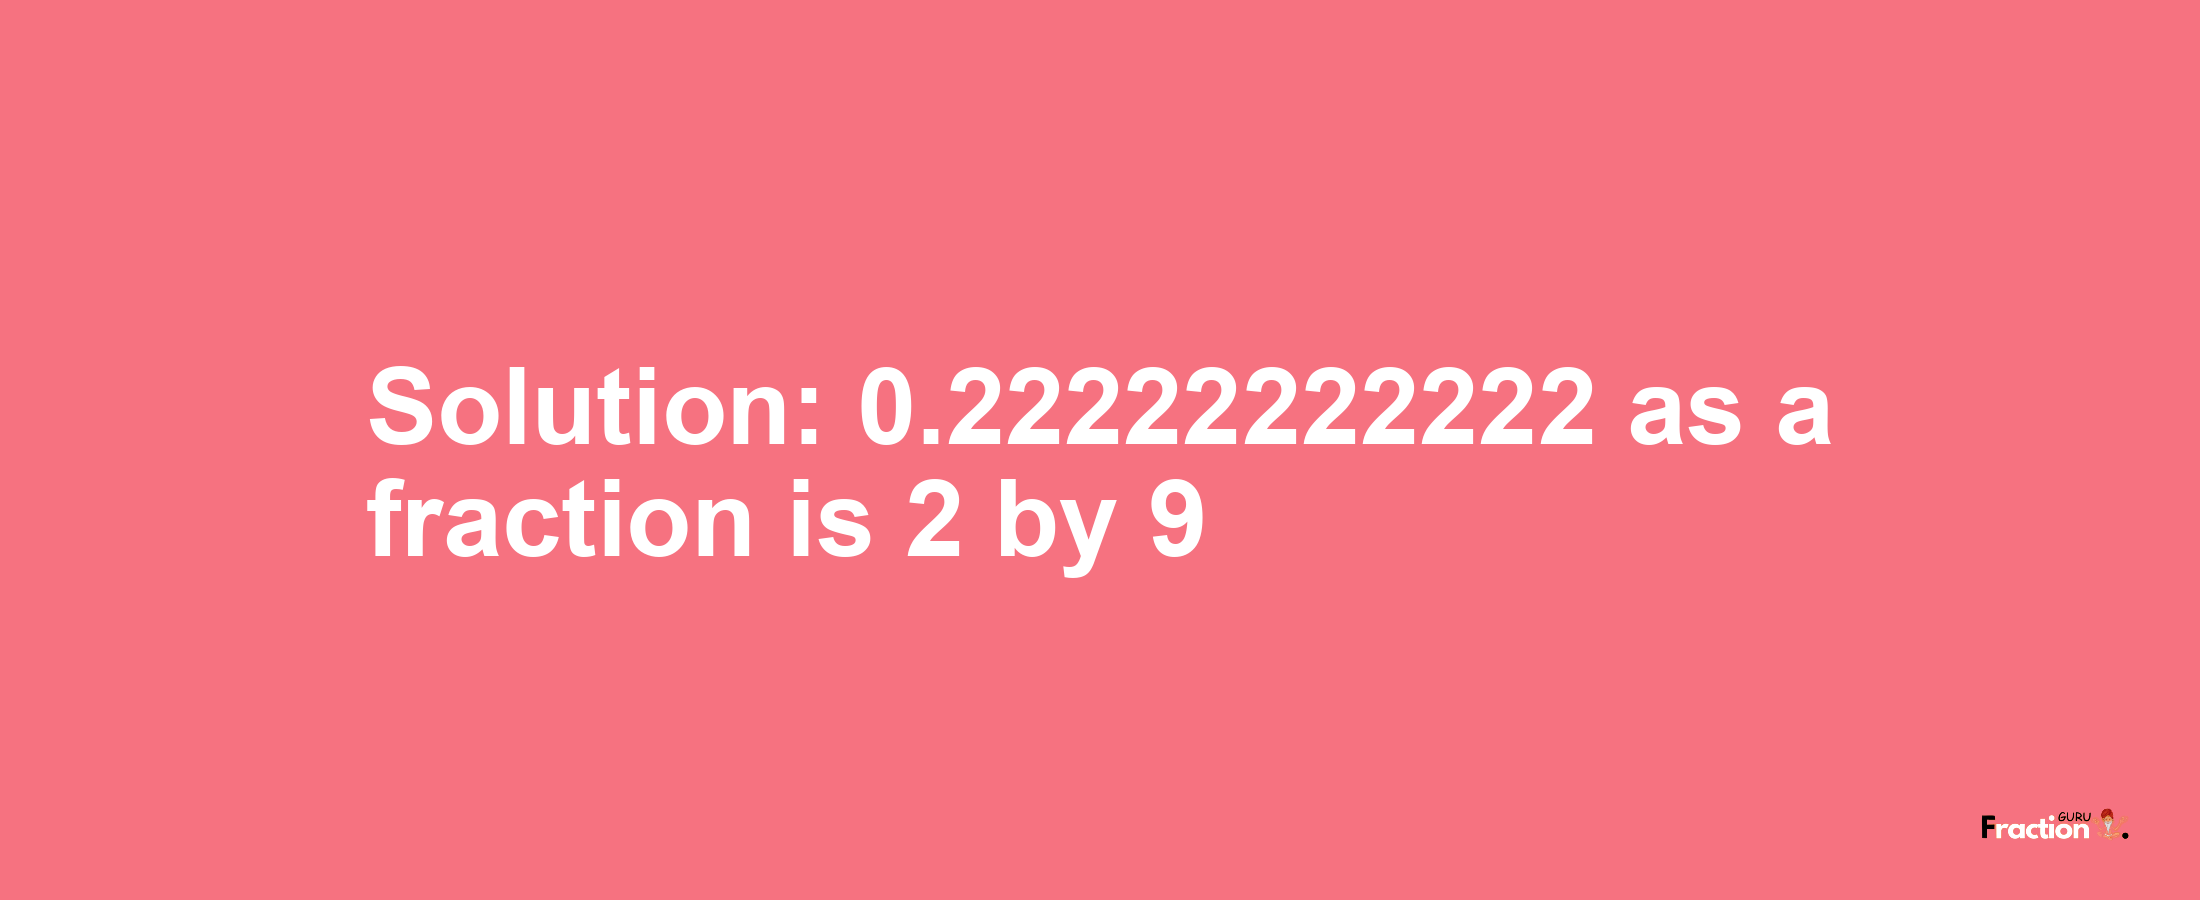 Solution:0.22222222222 as a fraction is 2/9